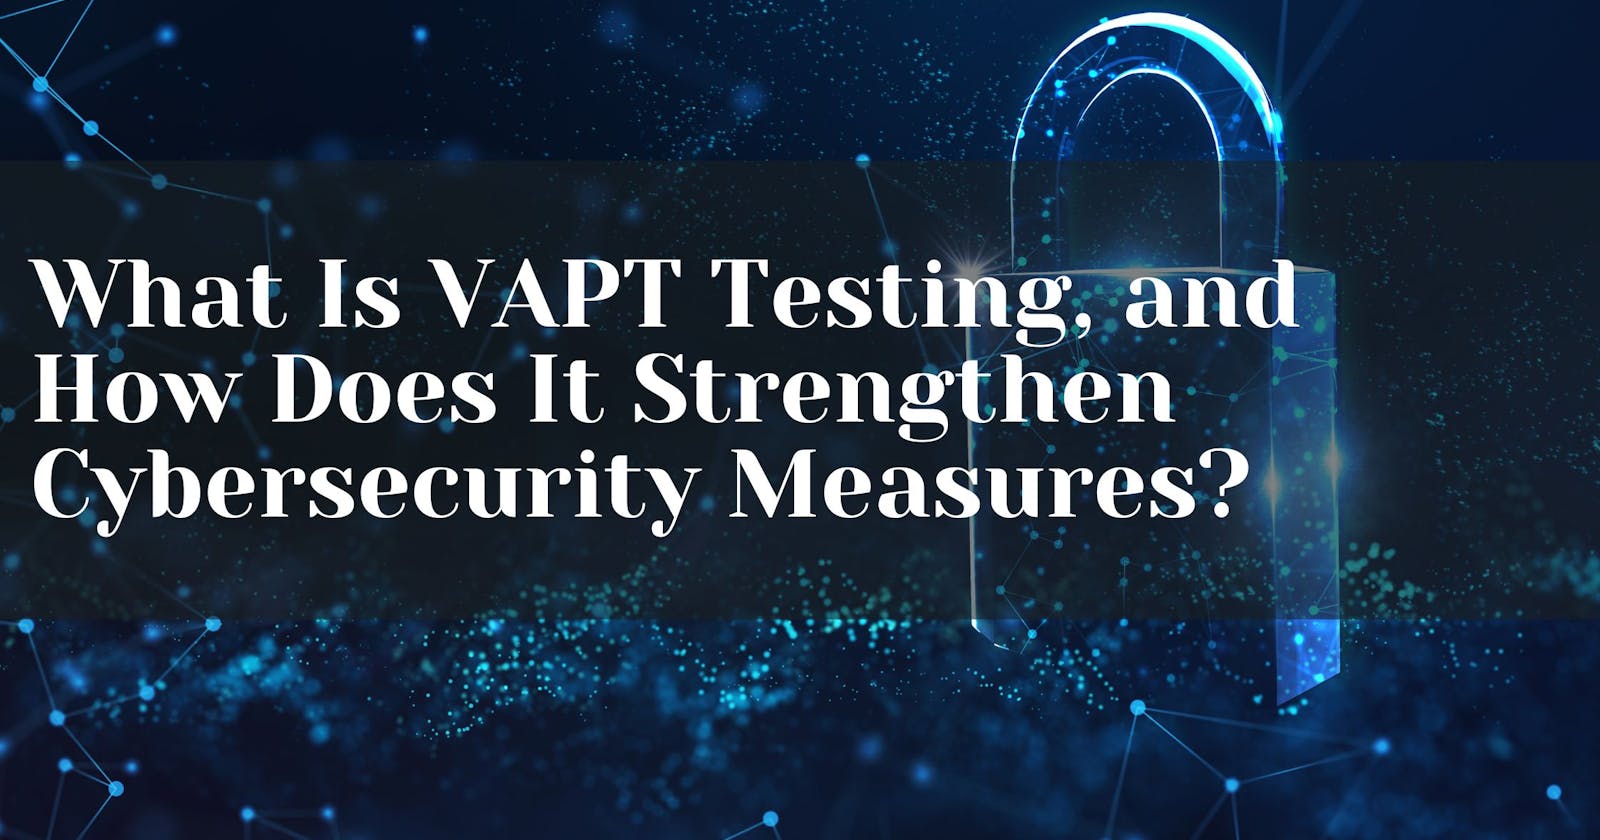 What Is VAPT Testing, and How Does It Strengthen Cybersecurity Measures?